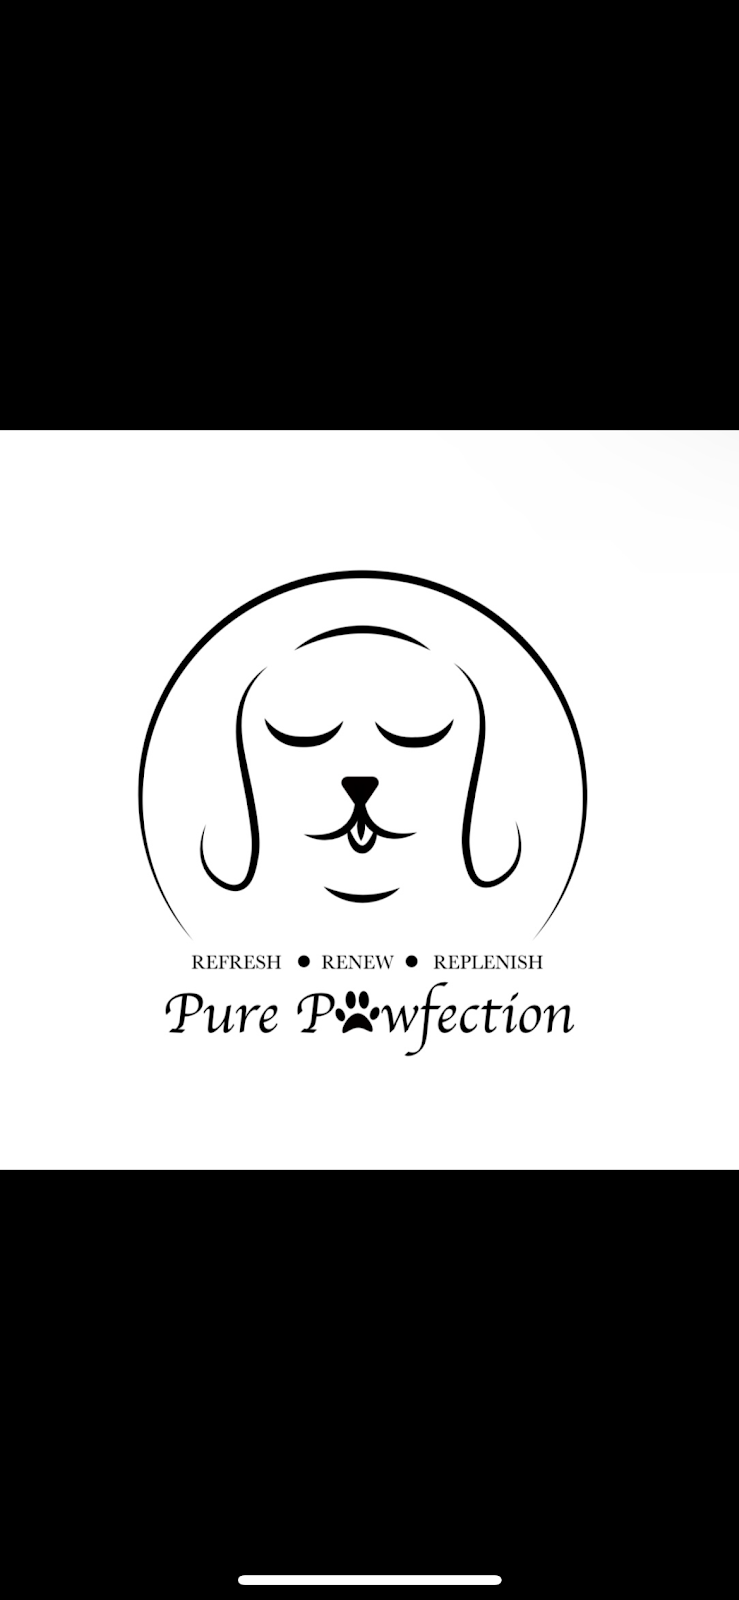 Pure Pawfection | 2753 Applewood Dr, Fairfield, CA 94534 | Phone: (707) 419-1899